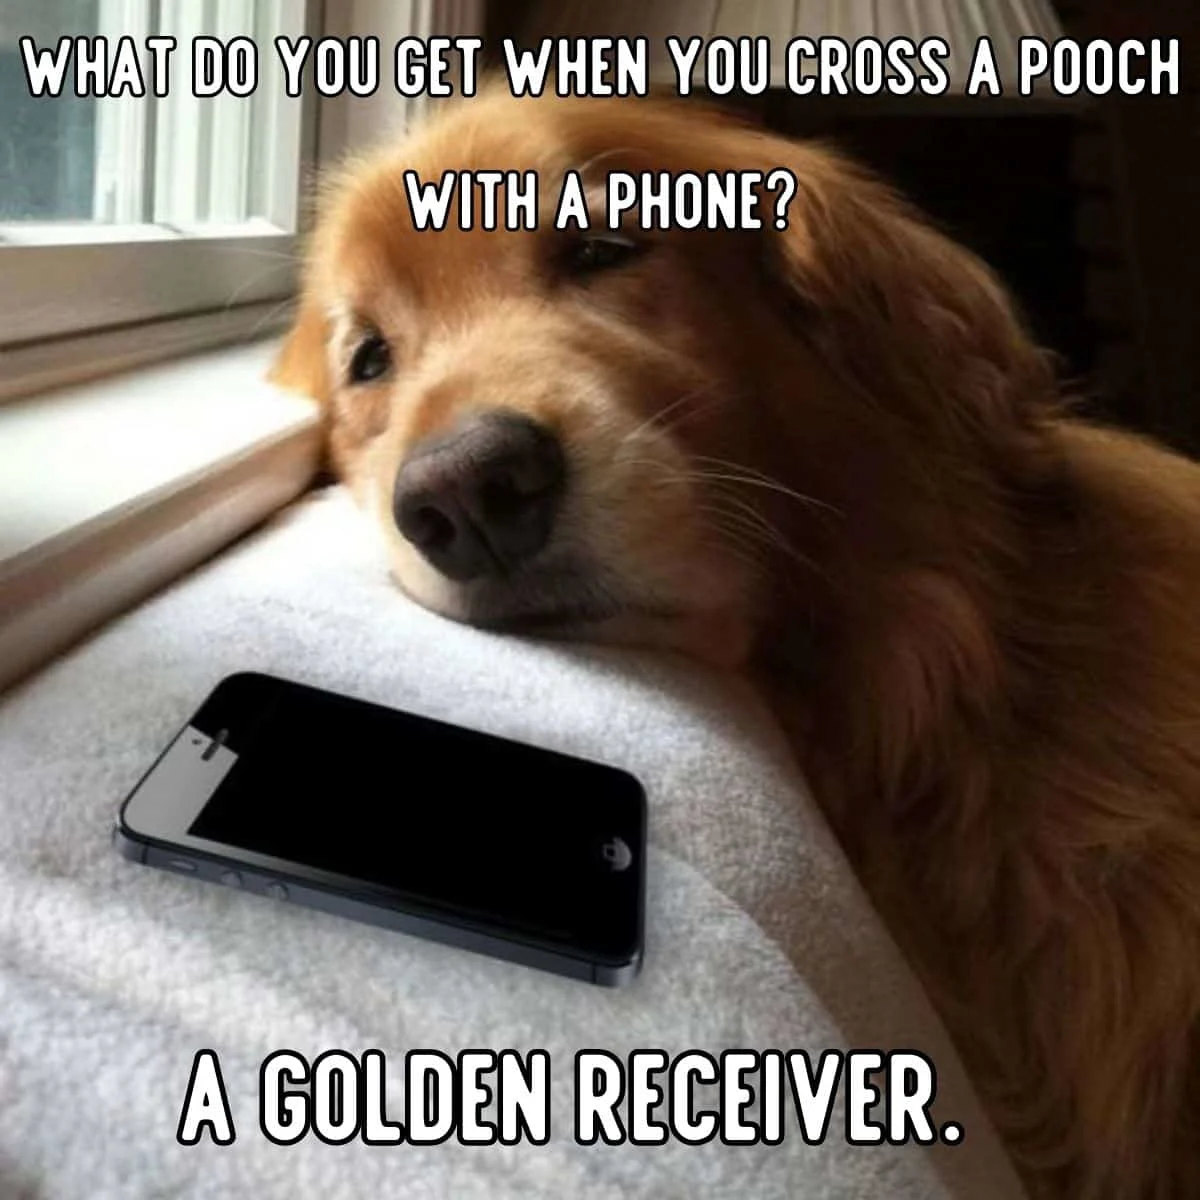 pooch with a phone joke